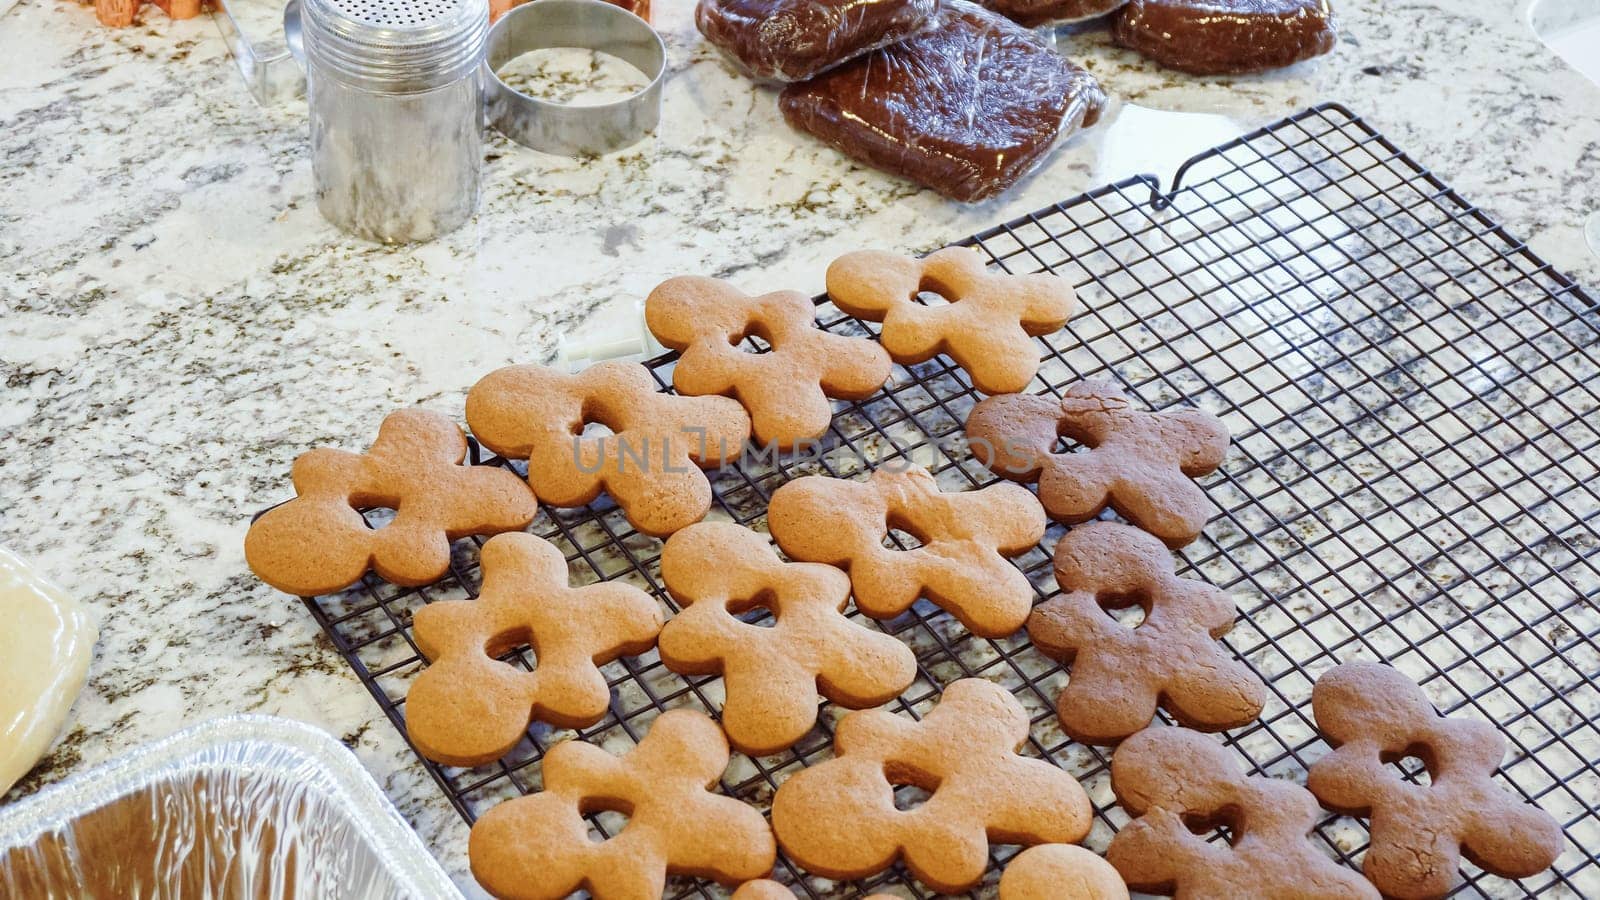 Baking Christmas Gingerbread Cookies in a Modern Kitchen by arinahabich